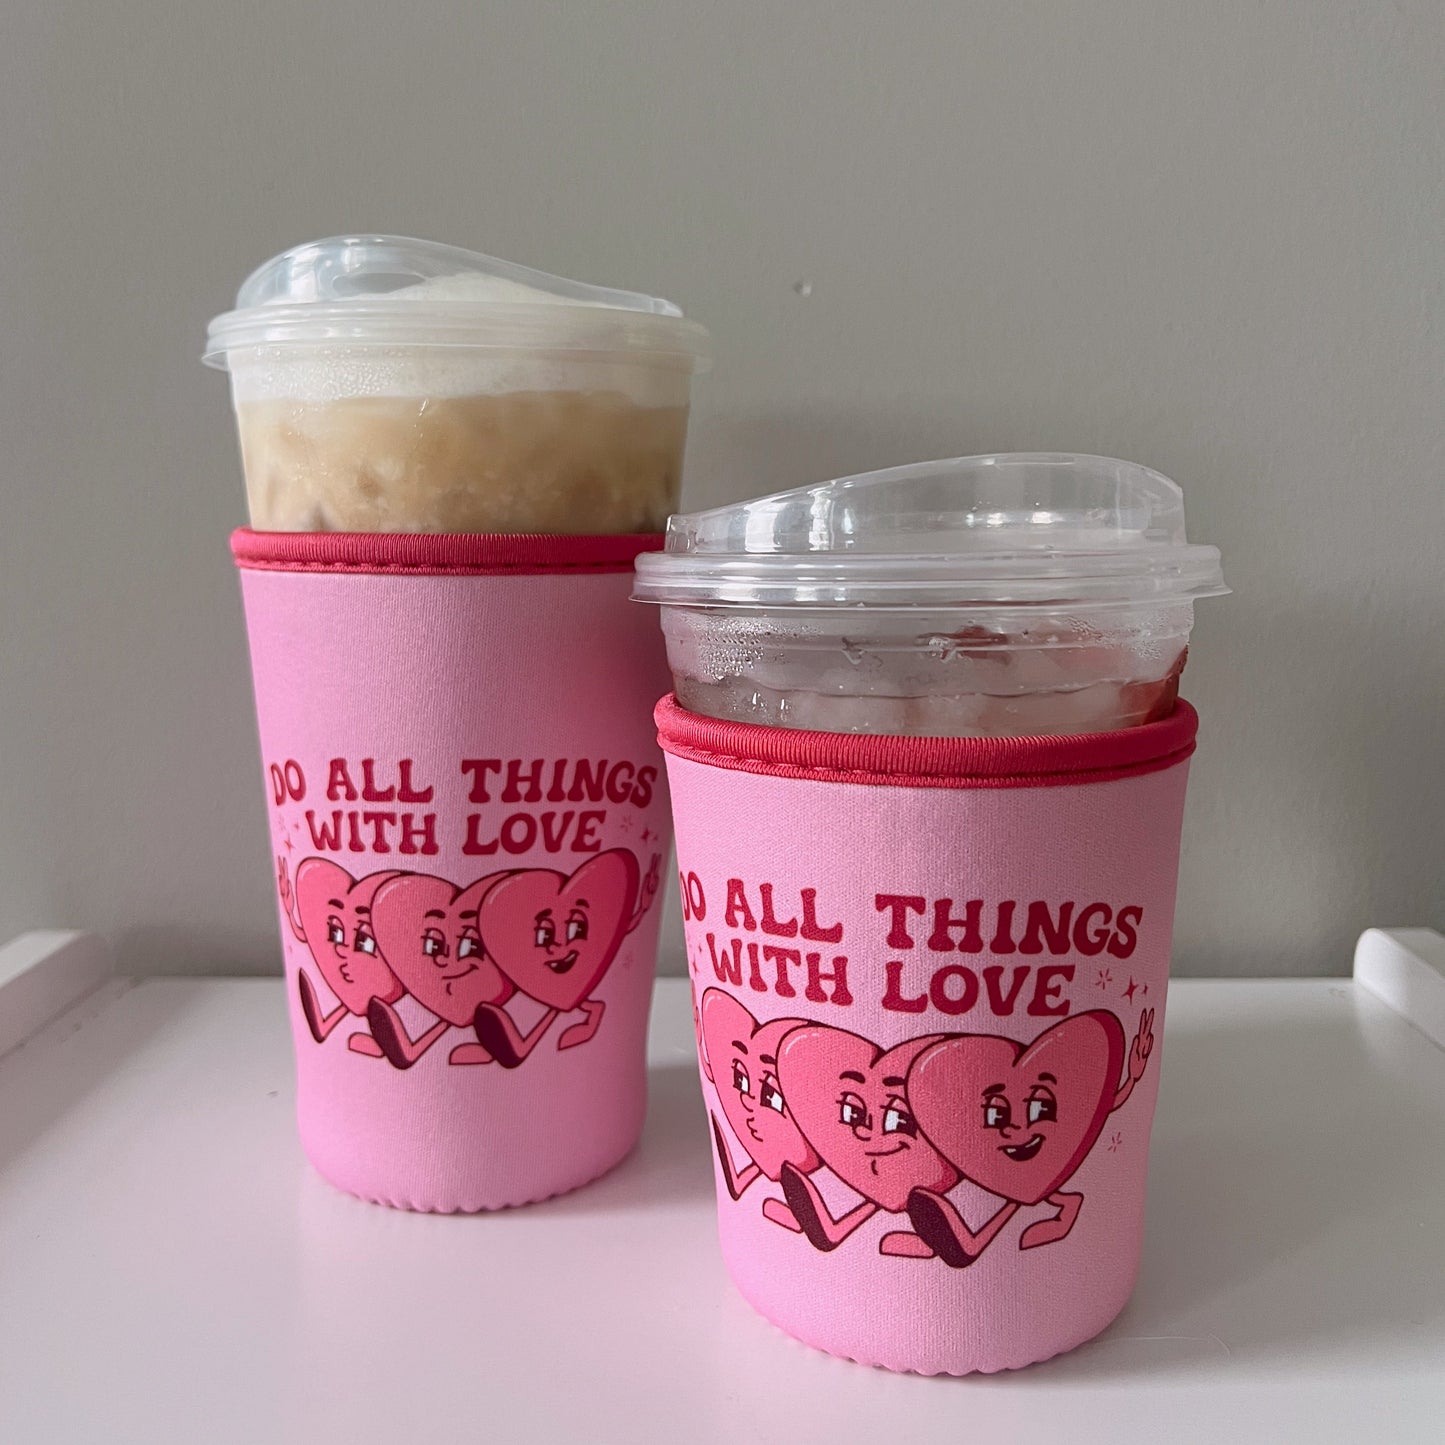 Do All Things With Love Iced Coffee Coozie